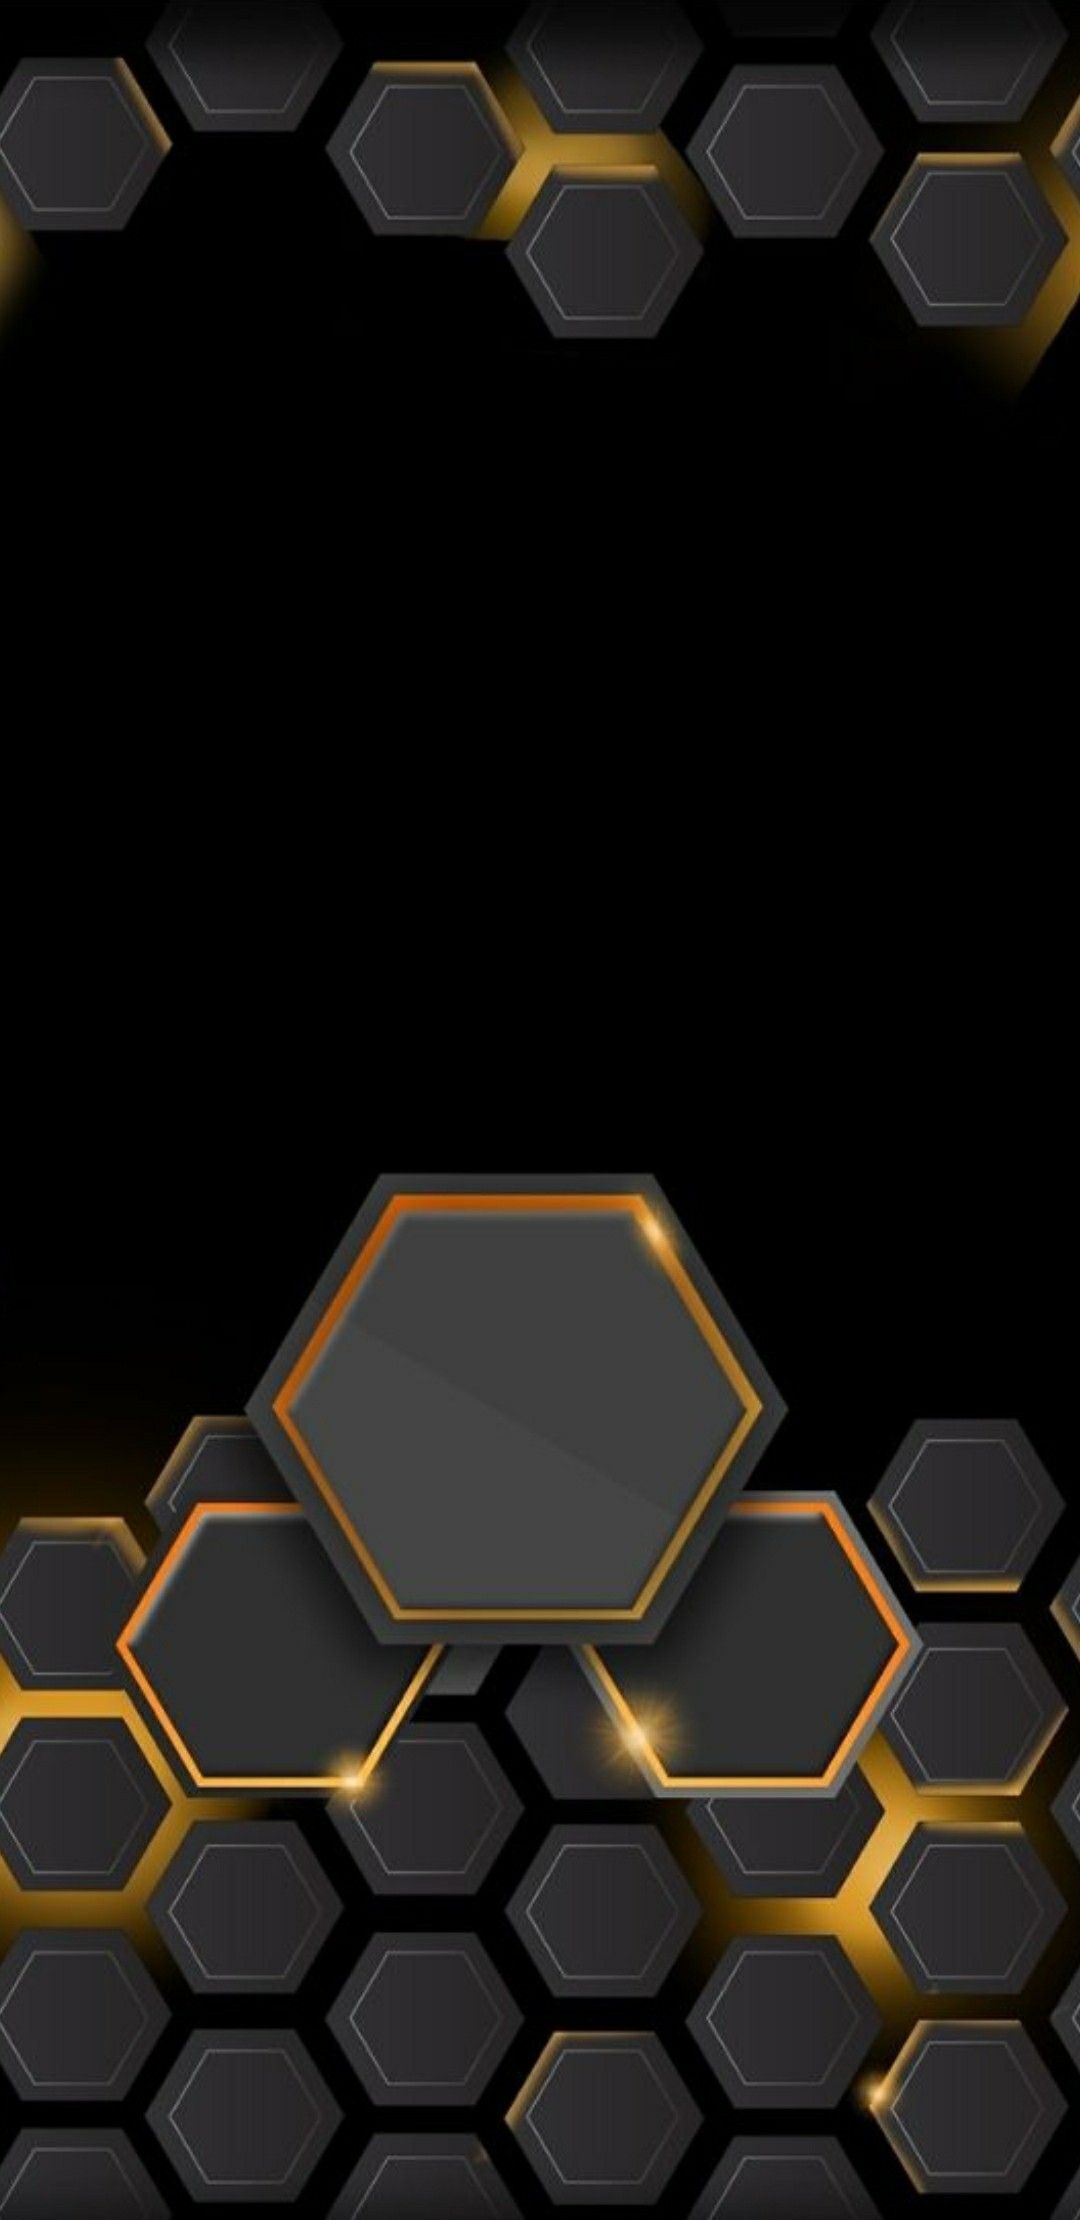 Android hexagon wallpaper, Creative design, User-submitted art, Hexagon theme, 1080x2220 HD Phone